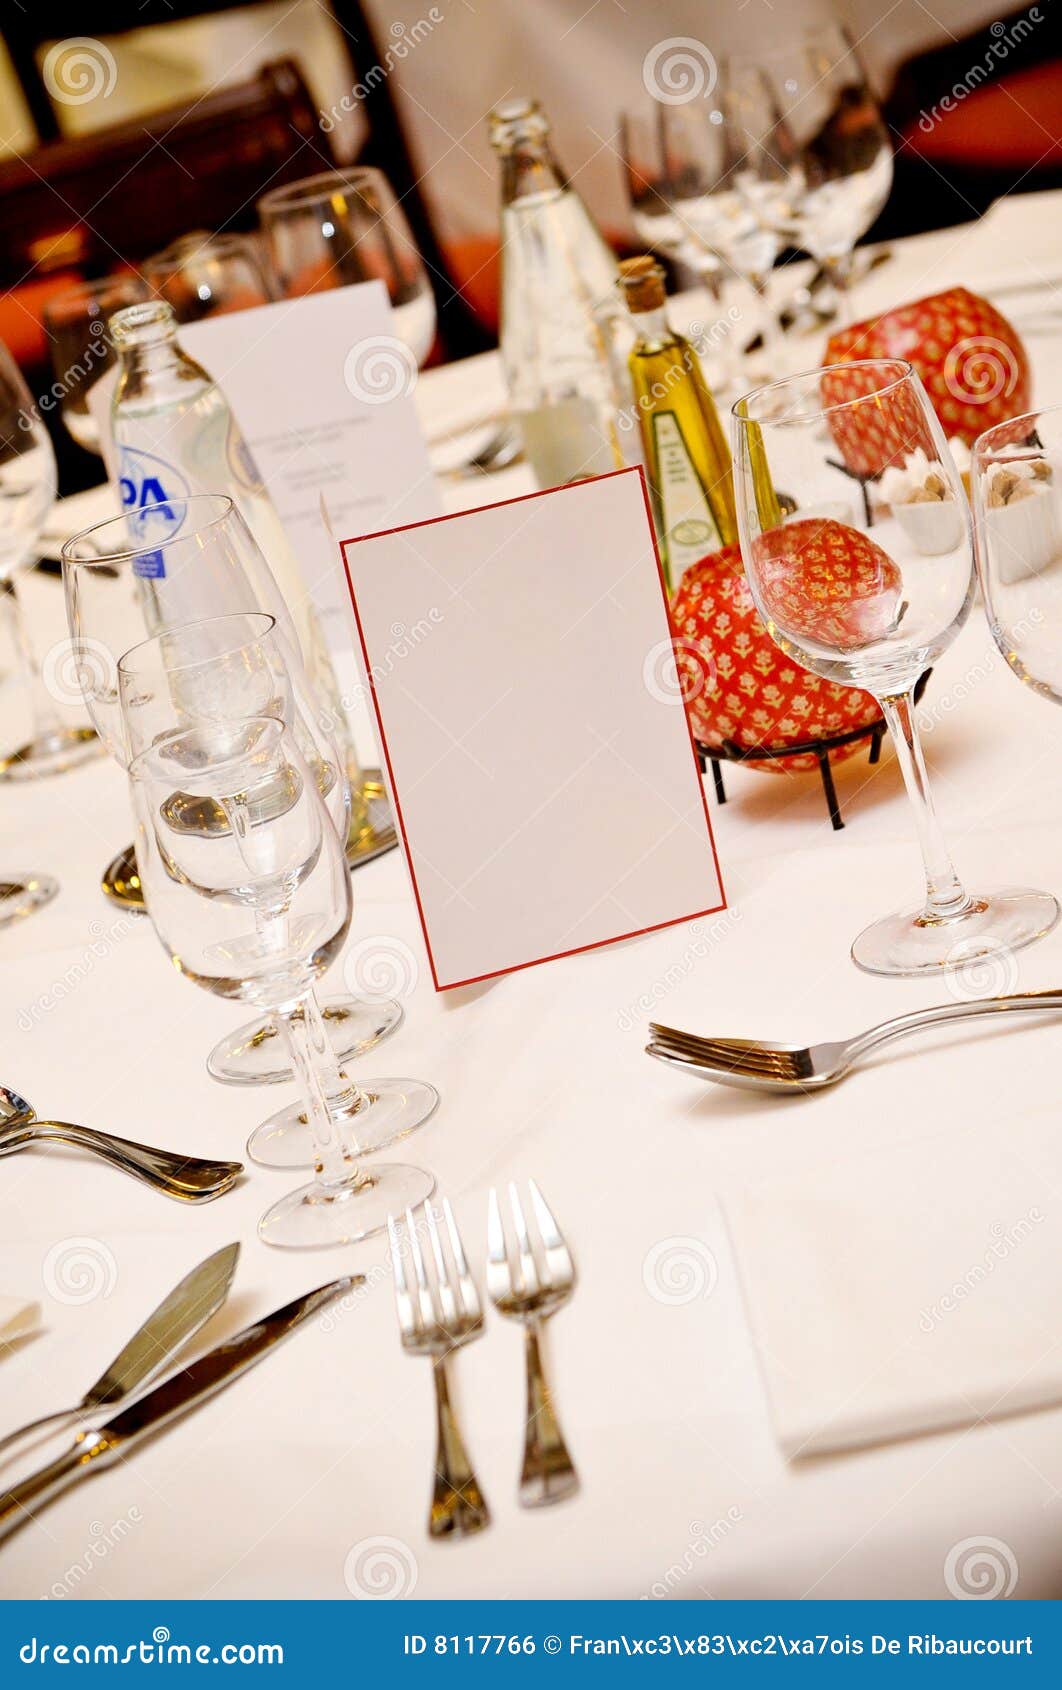 Fancy Place Setting On Table Royalty Free Stock Image Image 8117766